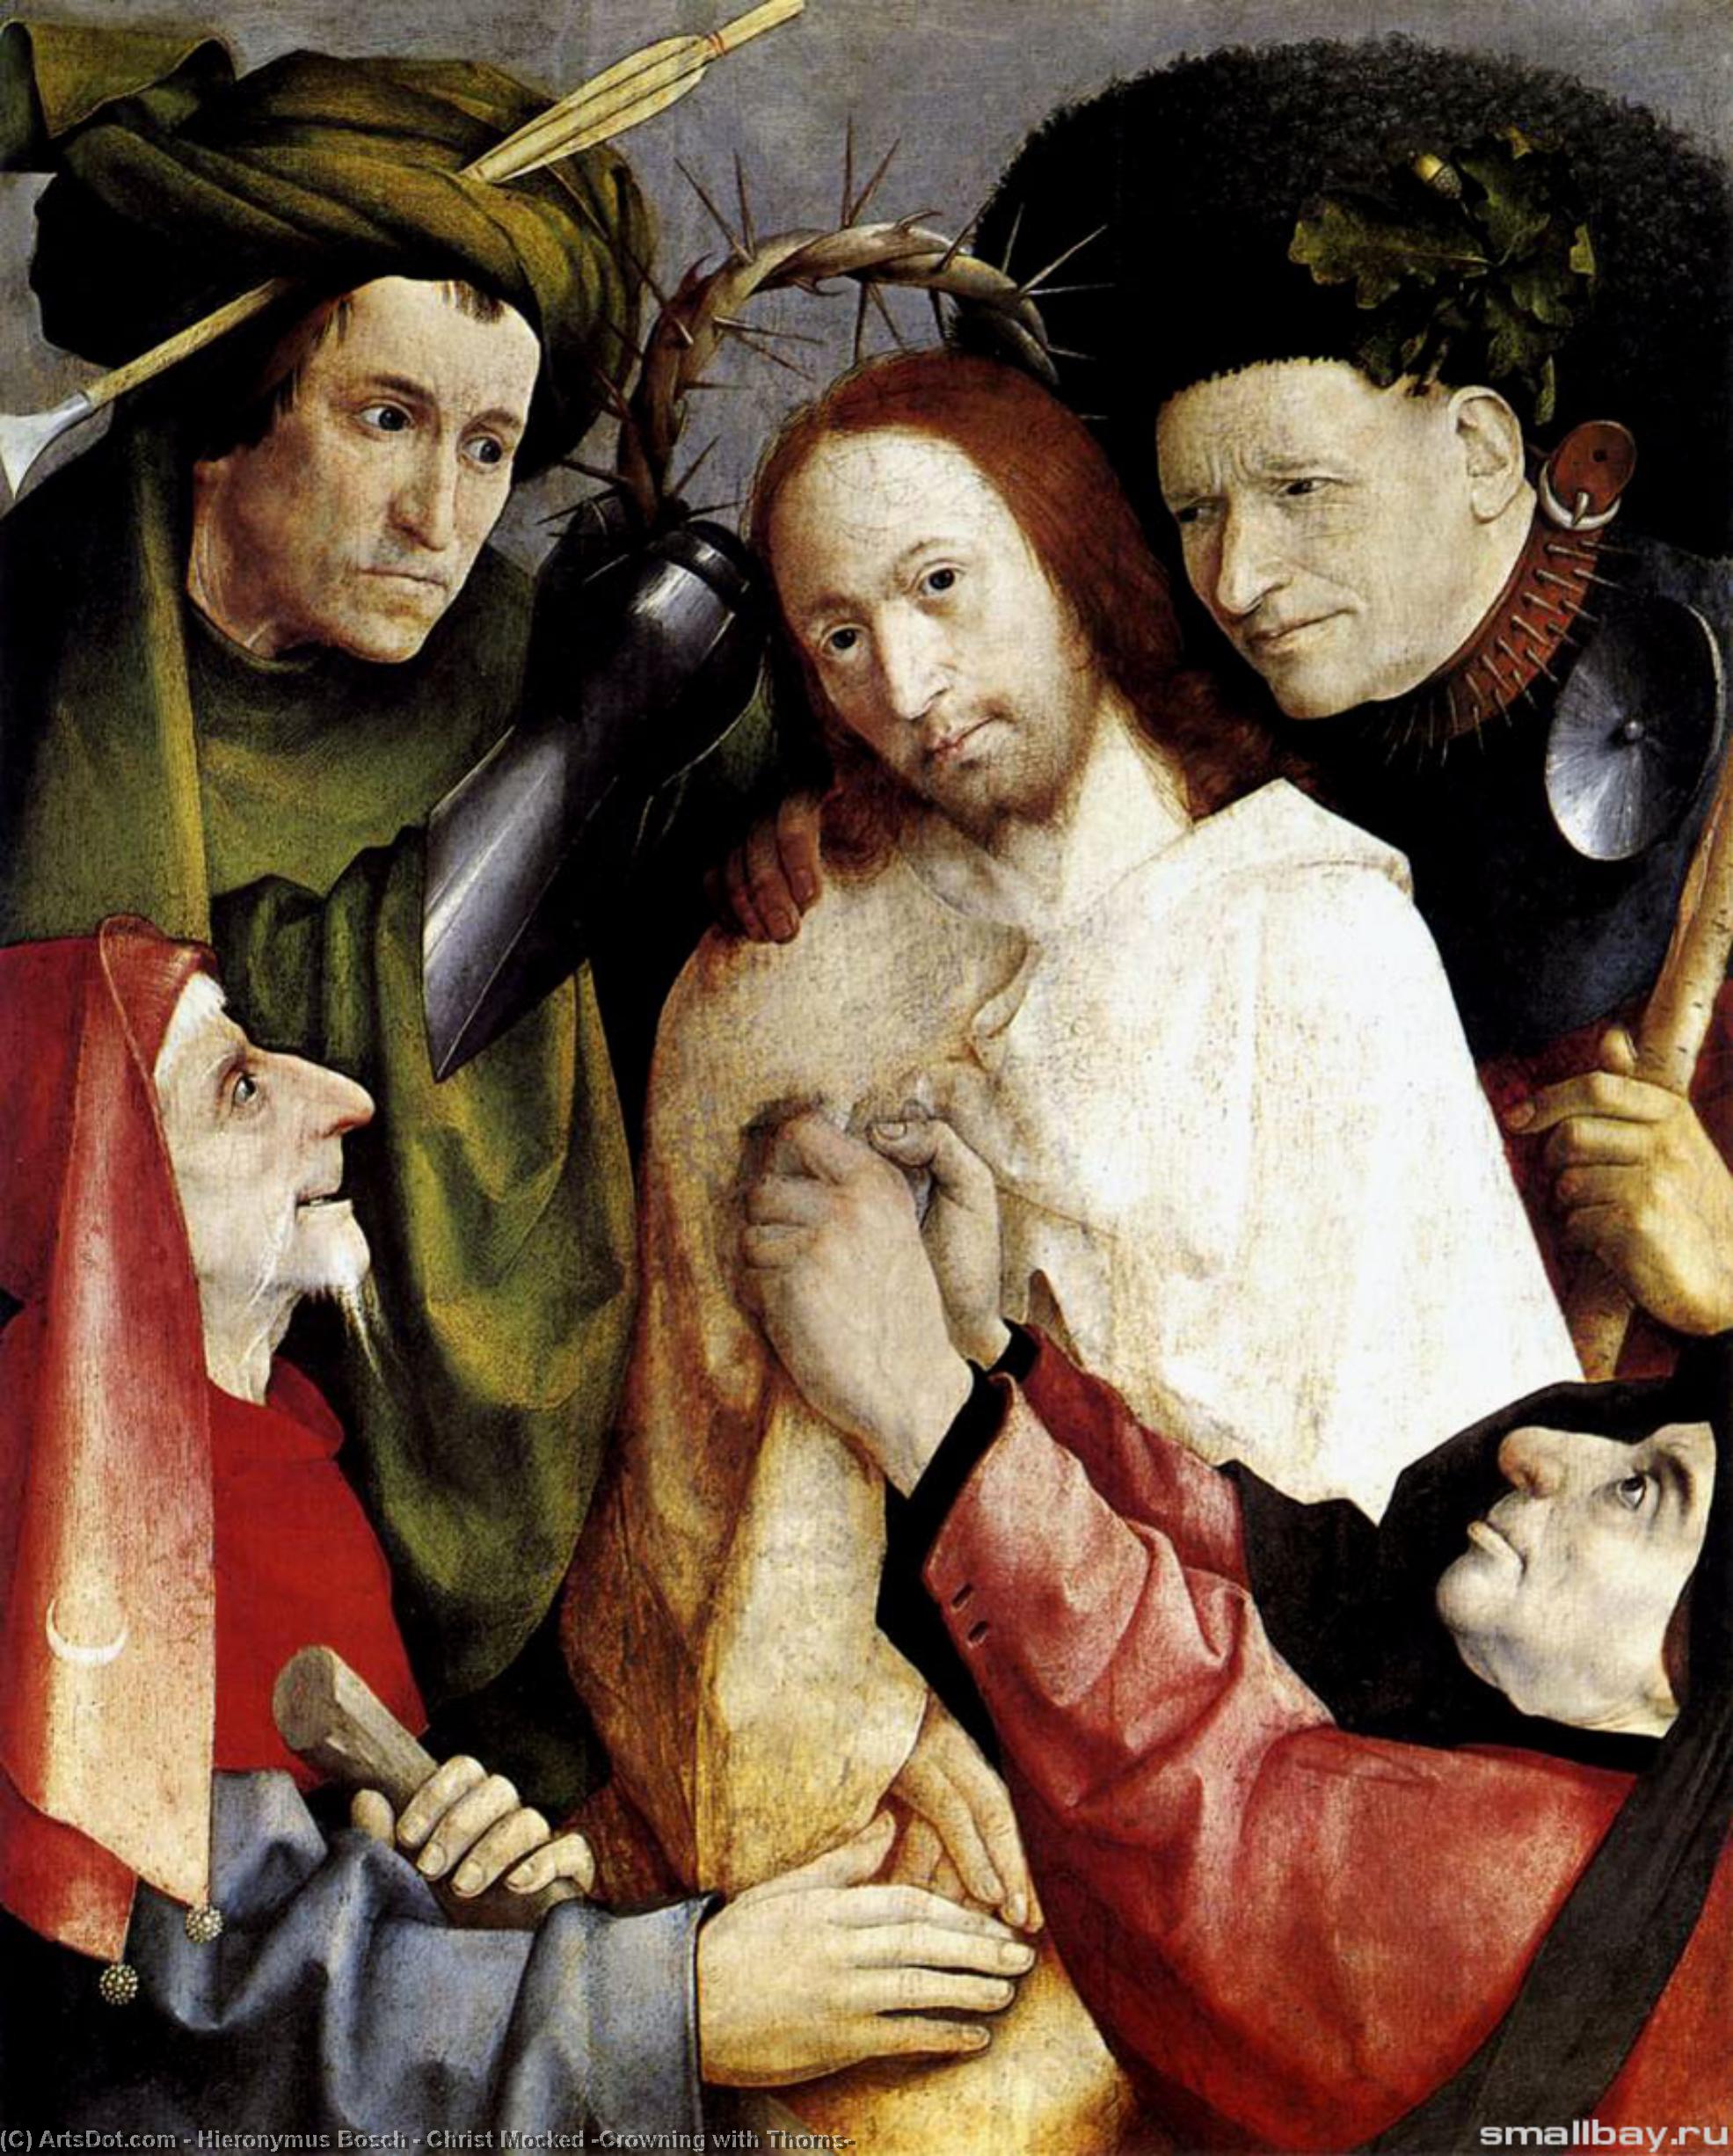 WikiOO.org - Encyclopedia of Fine Arts - Festés, Grafika Hieronymus Bosch - Christ Mocked (Crowning with Thorns)